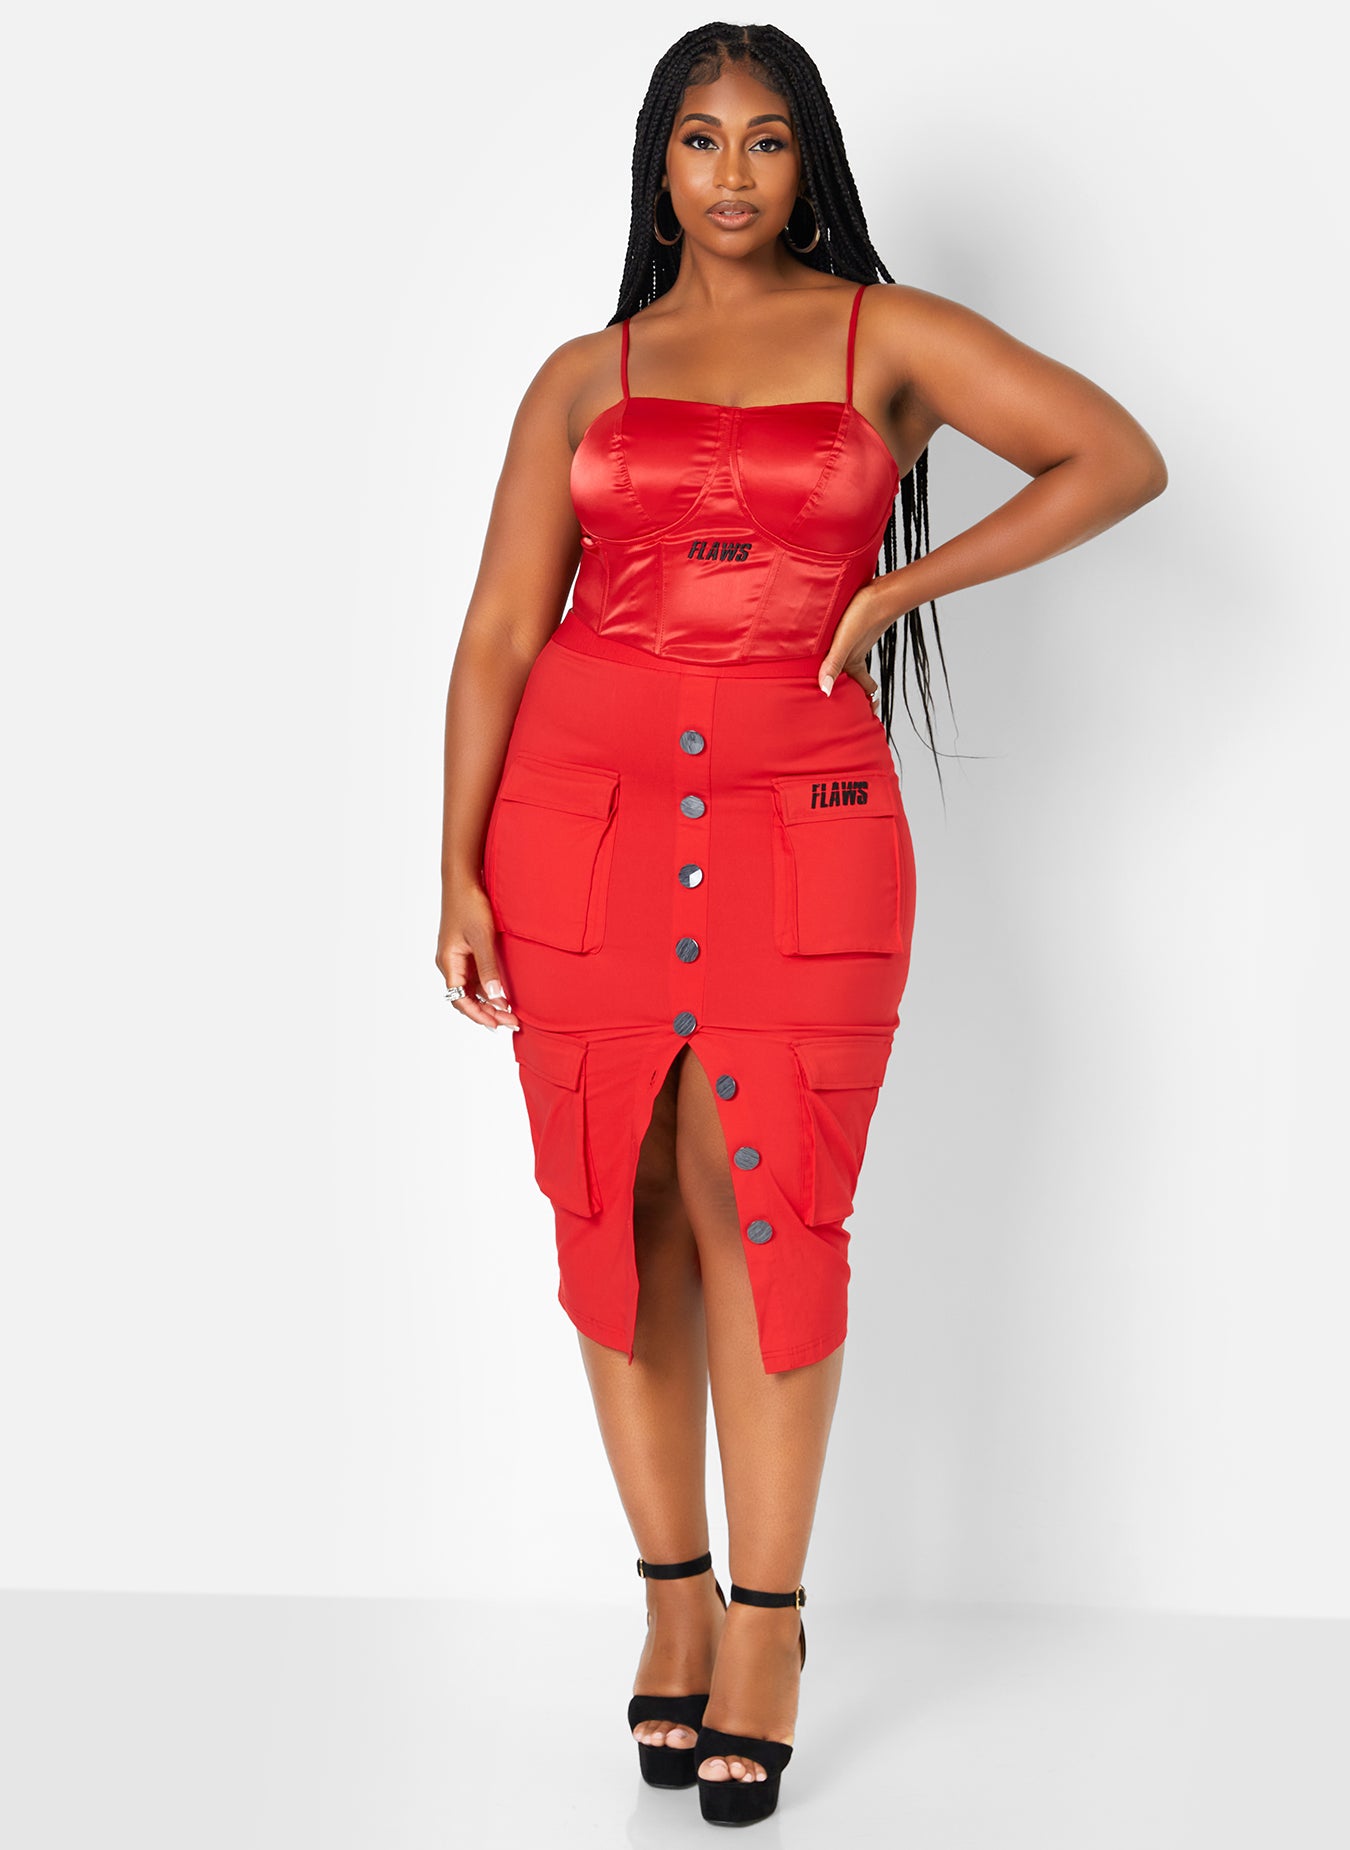 Flaws X REBDOLLS So Obsessed Satin Structured Corset Top - Red